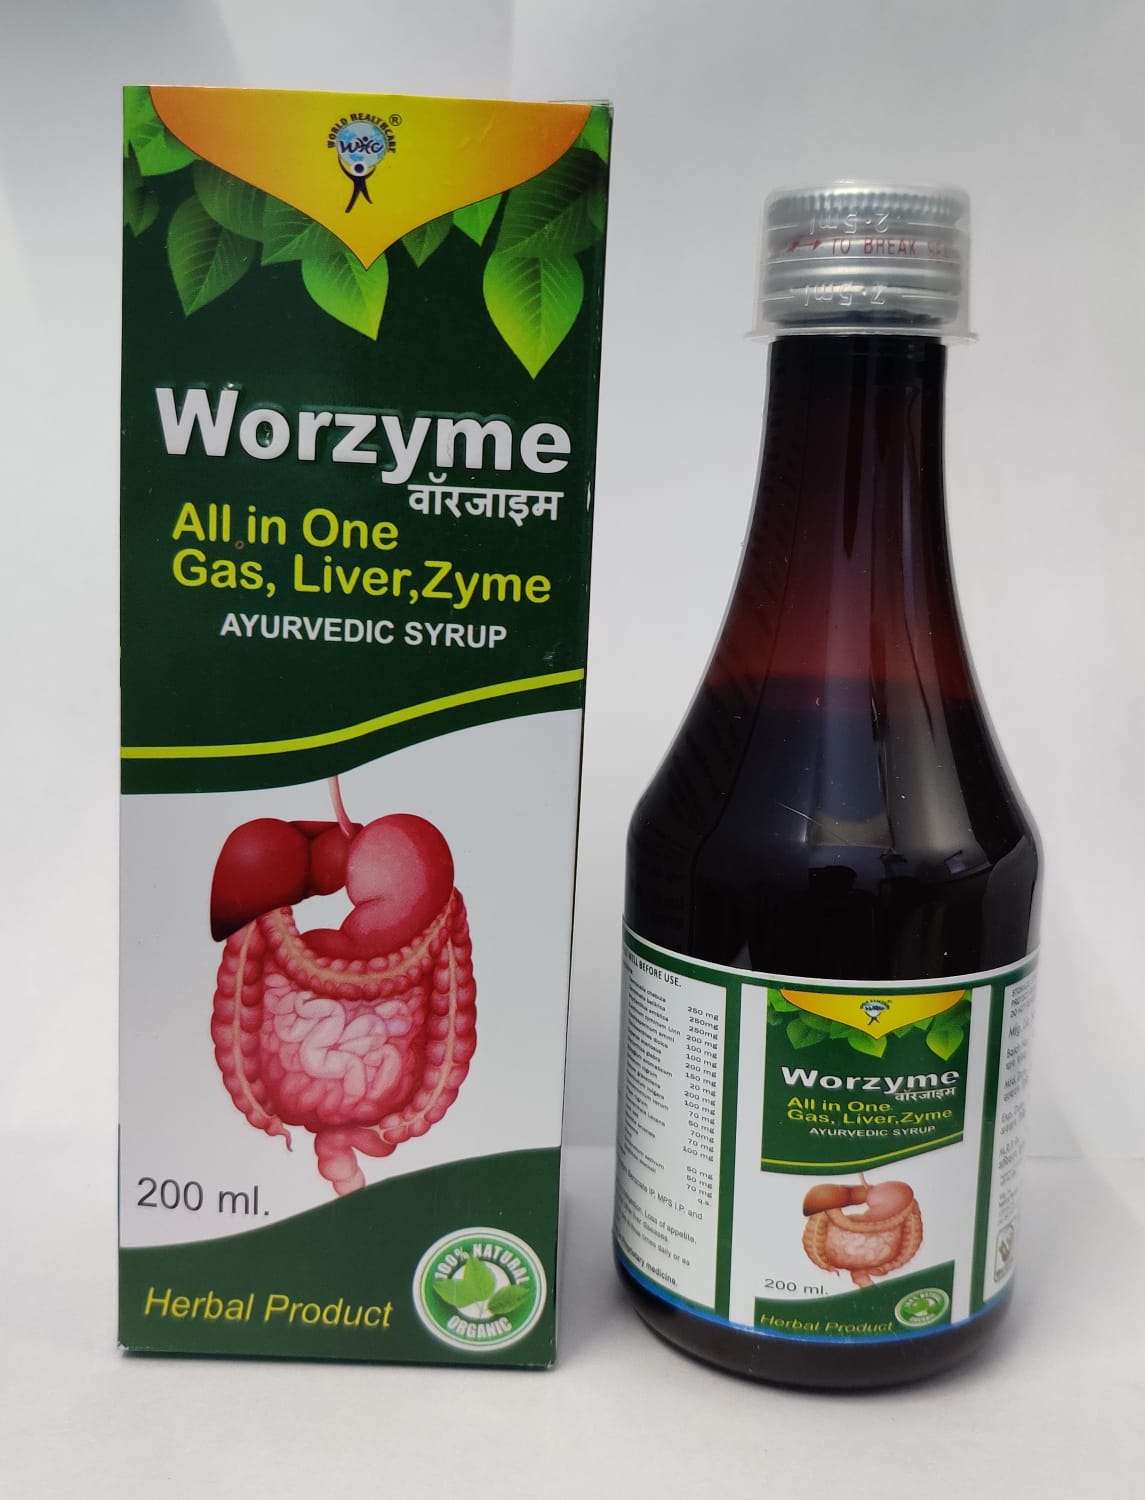 all in one gas, liver, ezyme tonic